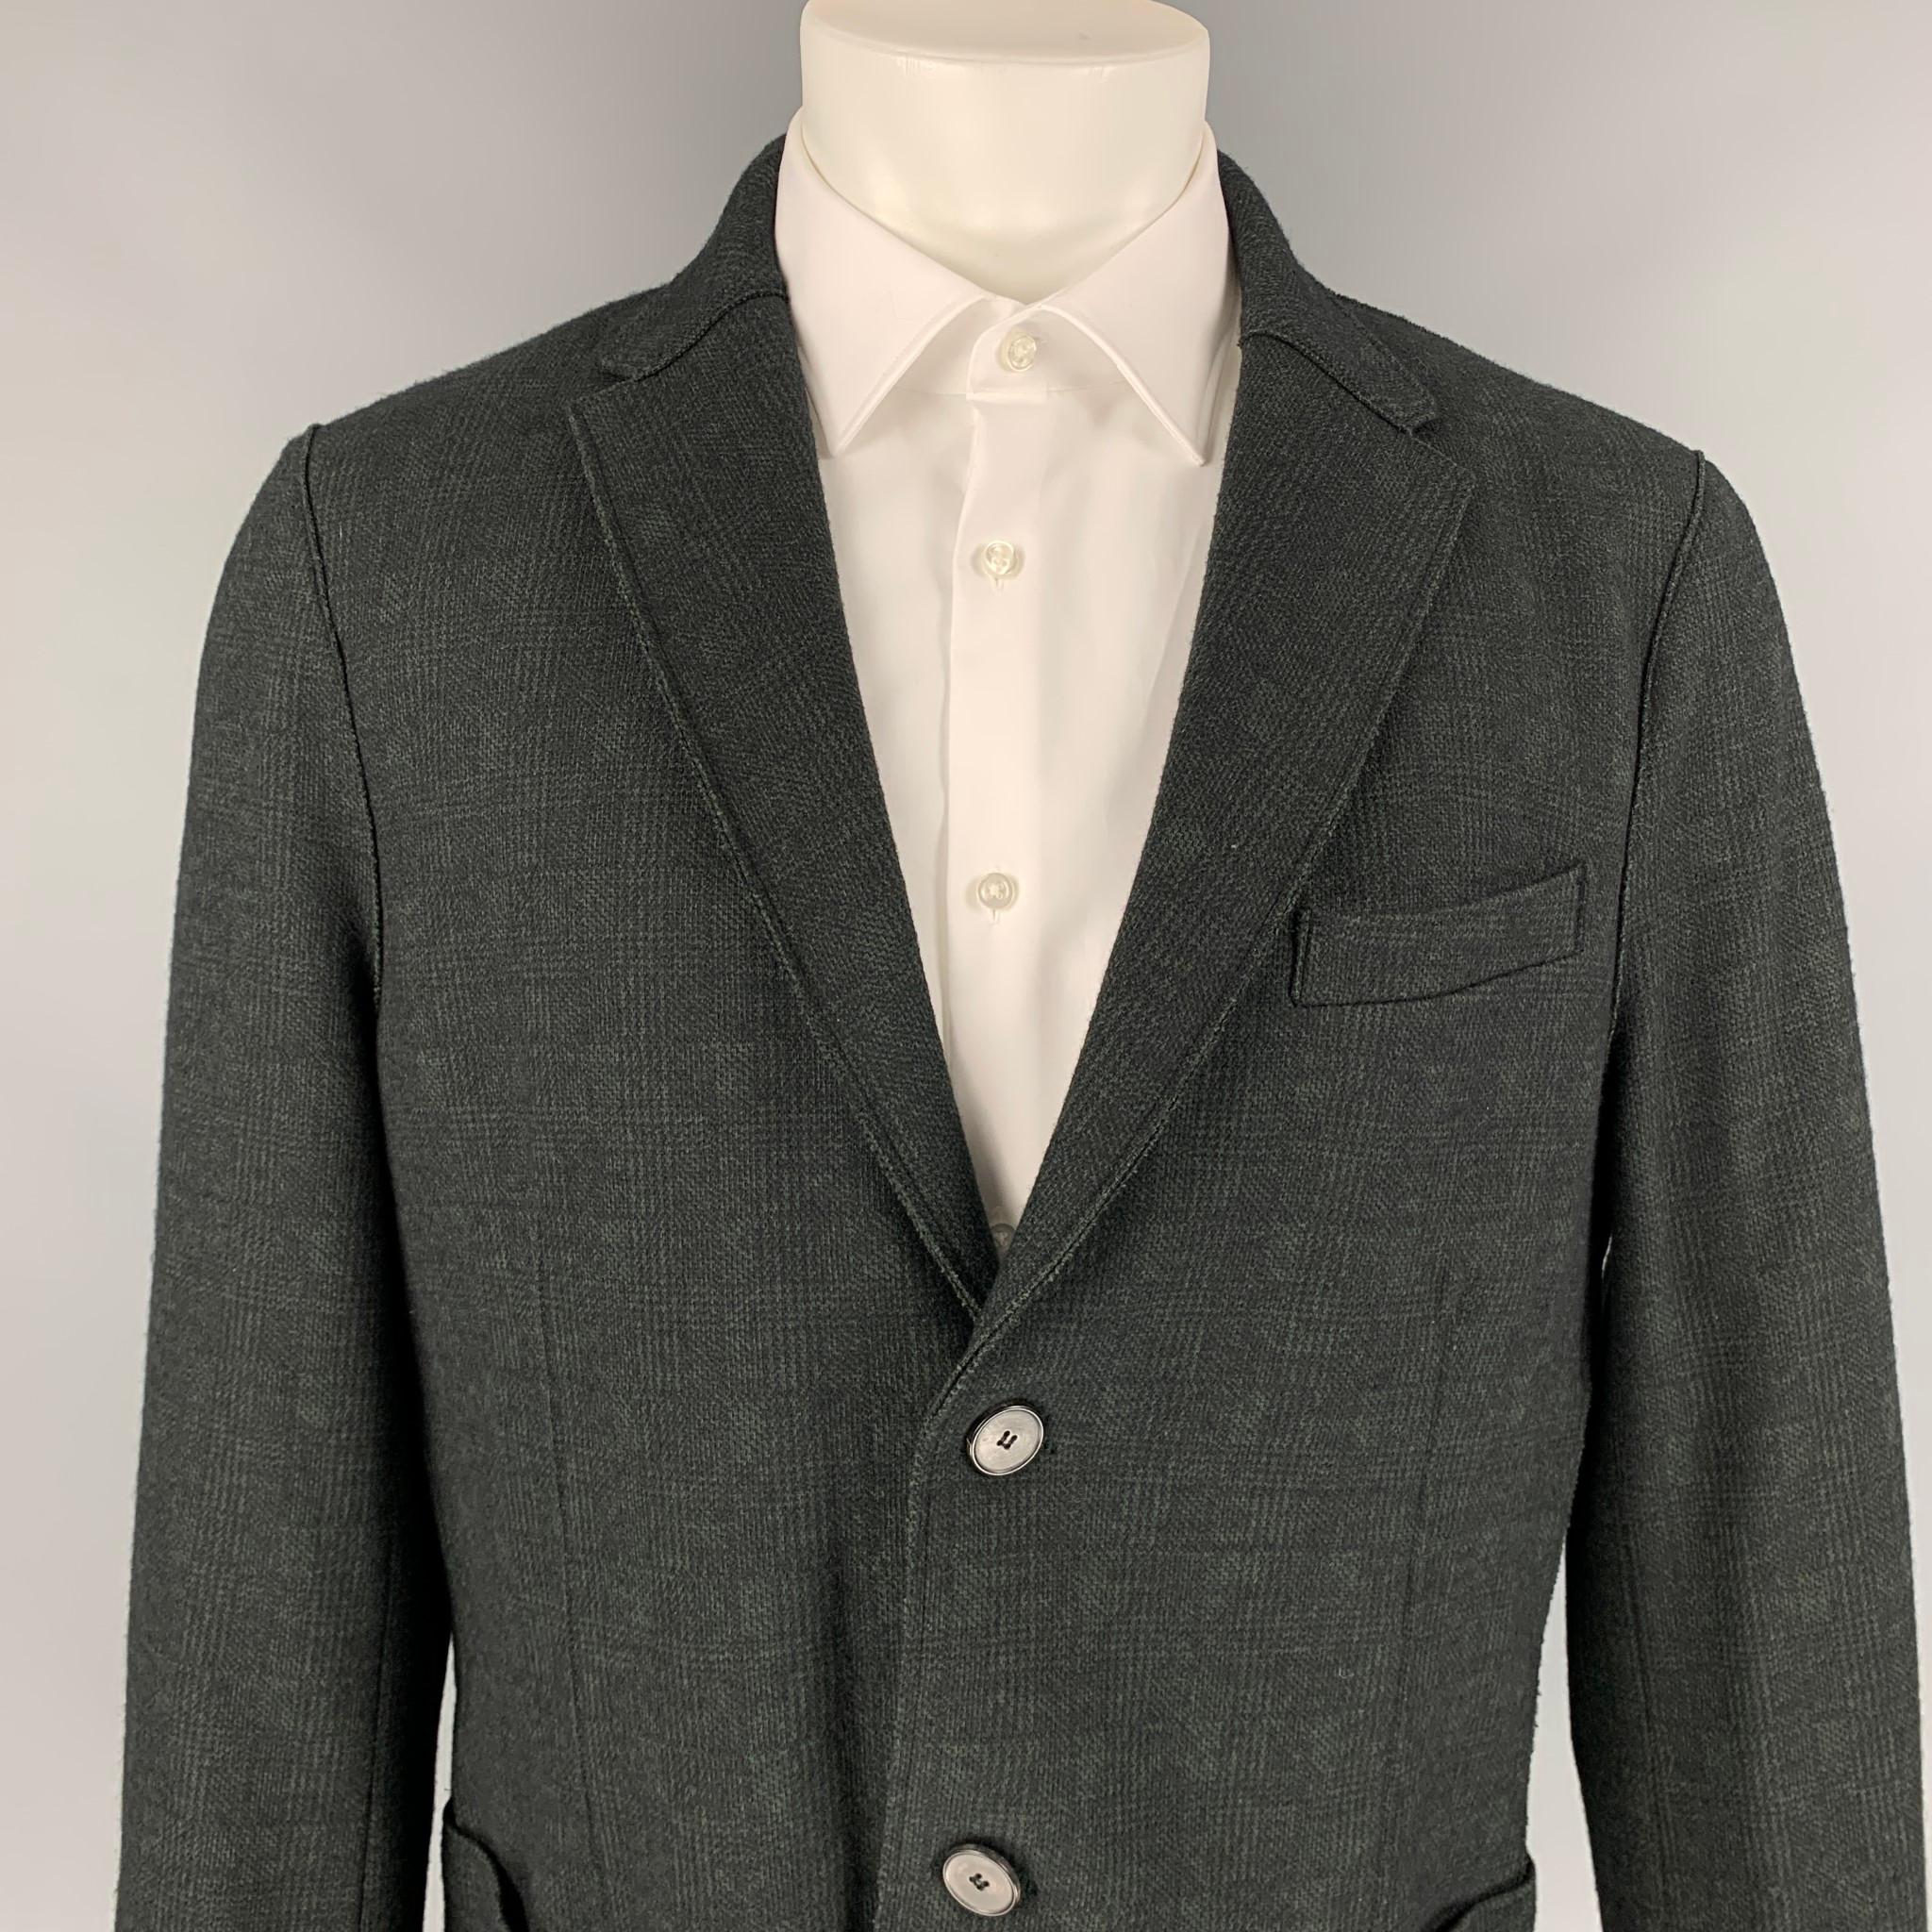 HARRIS WHARF LONDON sport coat comes in a green & black plaid wool / cotton featuring a notch lapel, patch pockets, and a double button closure. Made in England. 

Excellent Pre-Owned Condition.
Marked: 54

Measurements:

Shoulder: 18.5 in.
Chest: